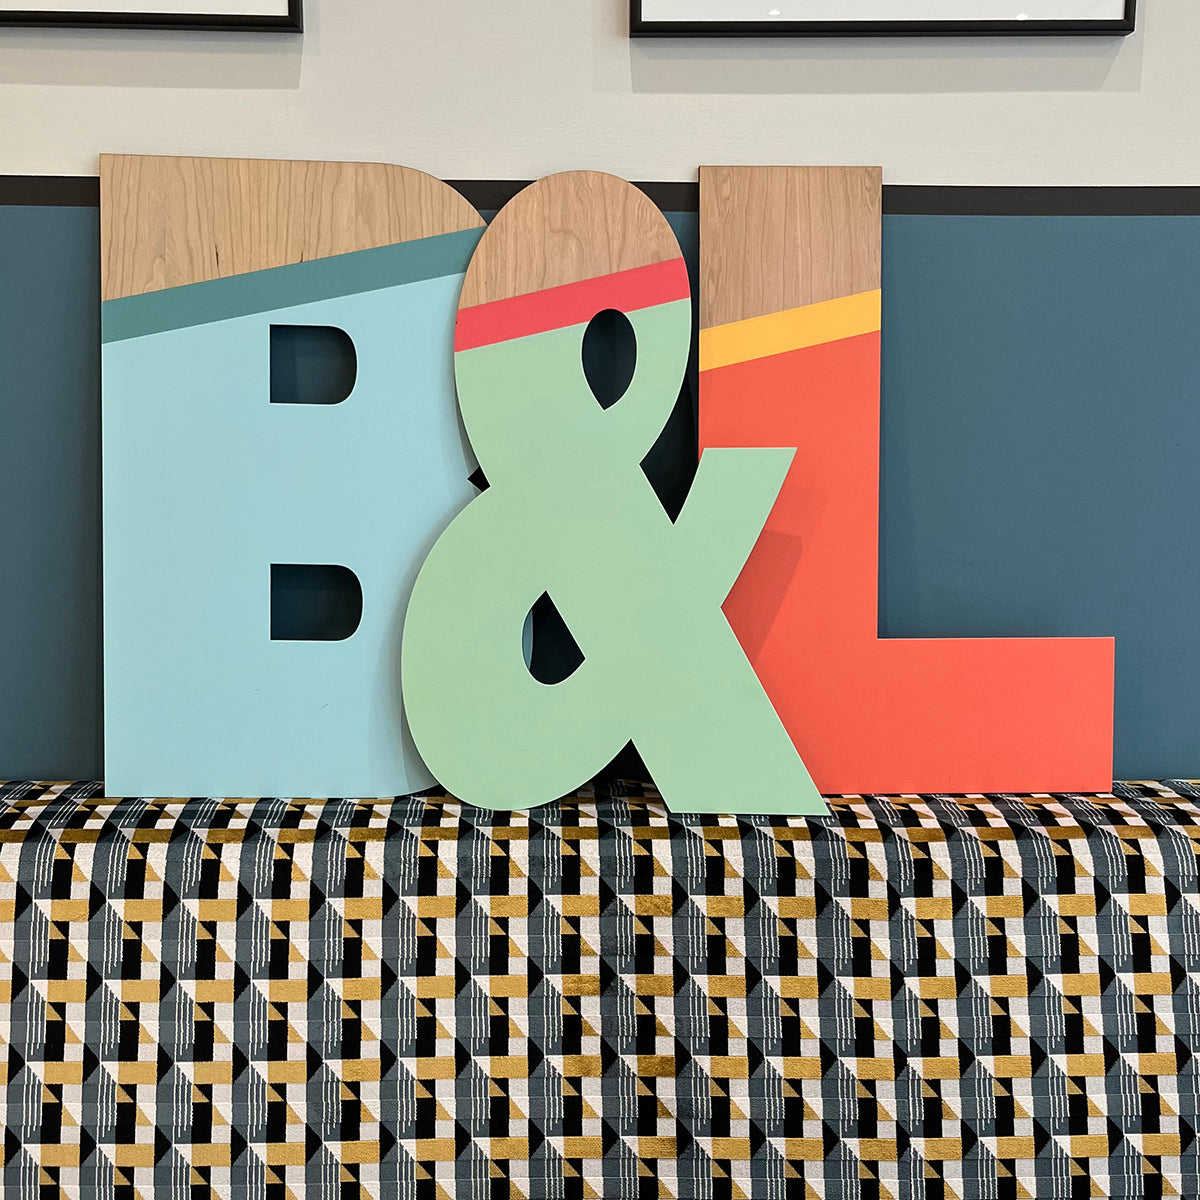 Large Wooden Personalised Printed Letter